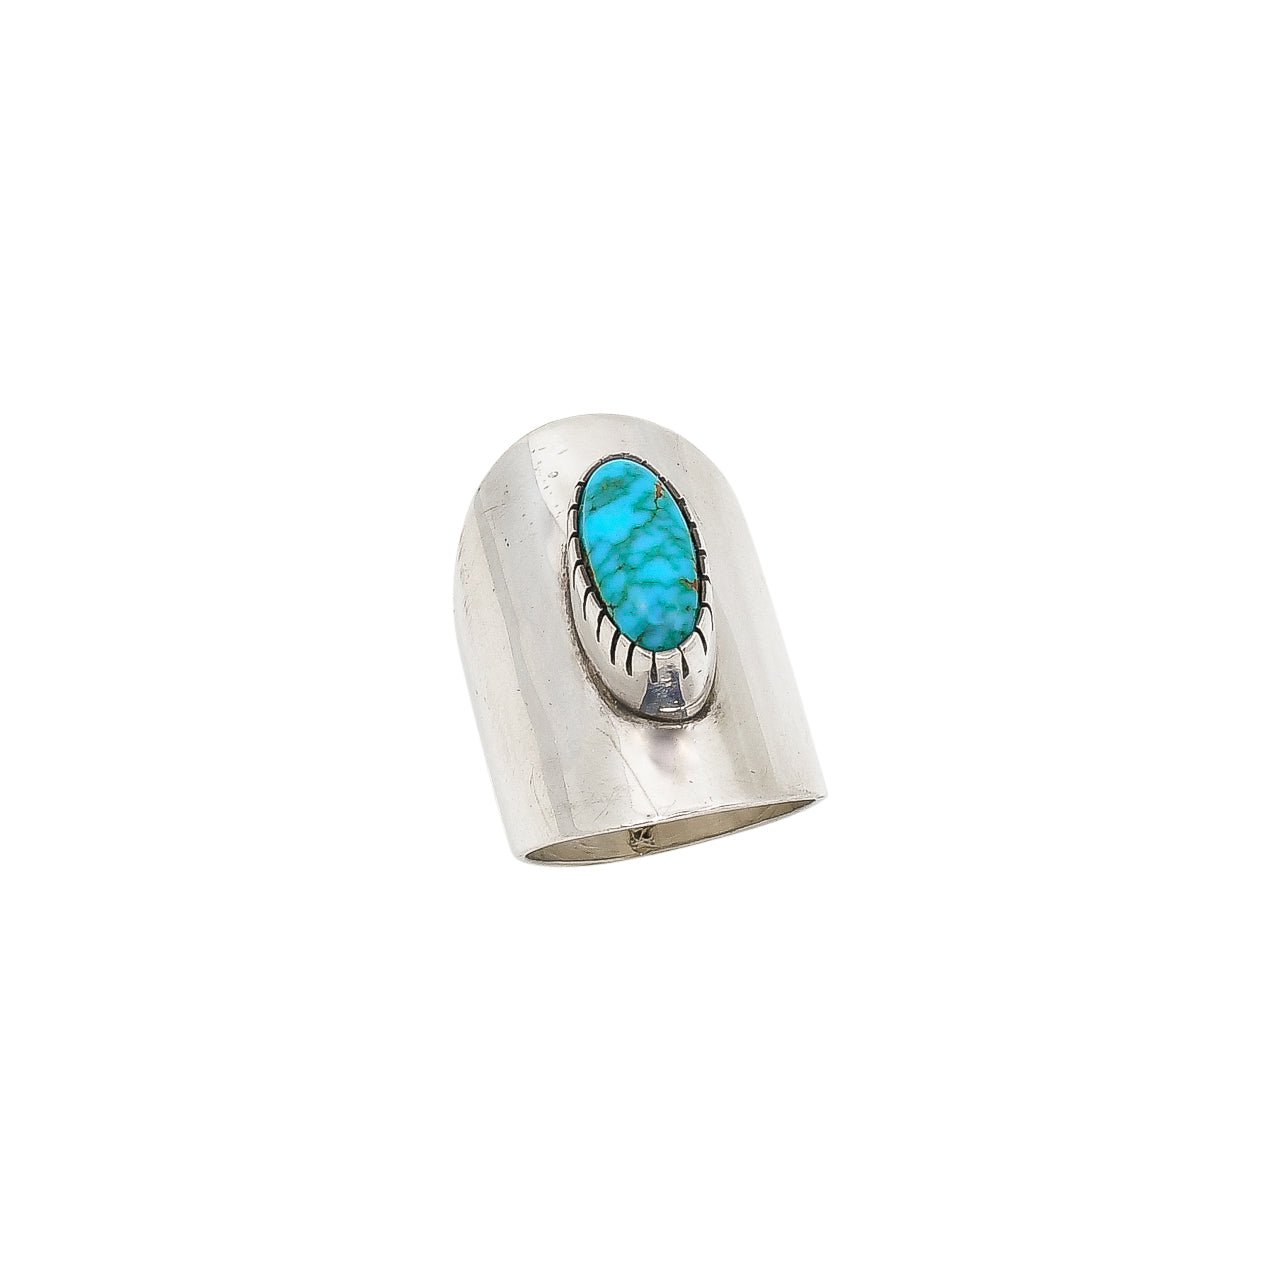 Navajo Wil Vandever Natural Turquoise Ring - Turquoise & Tufa